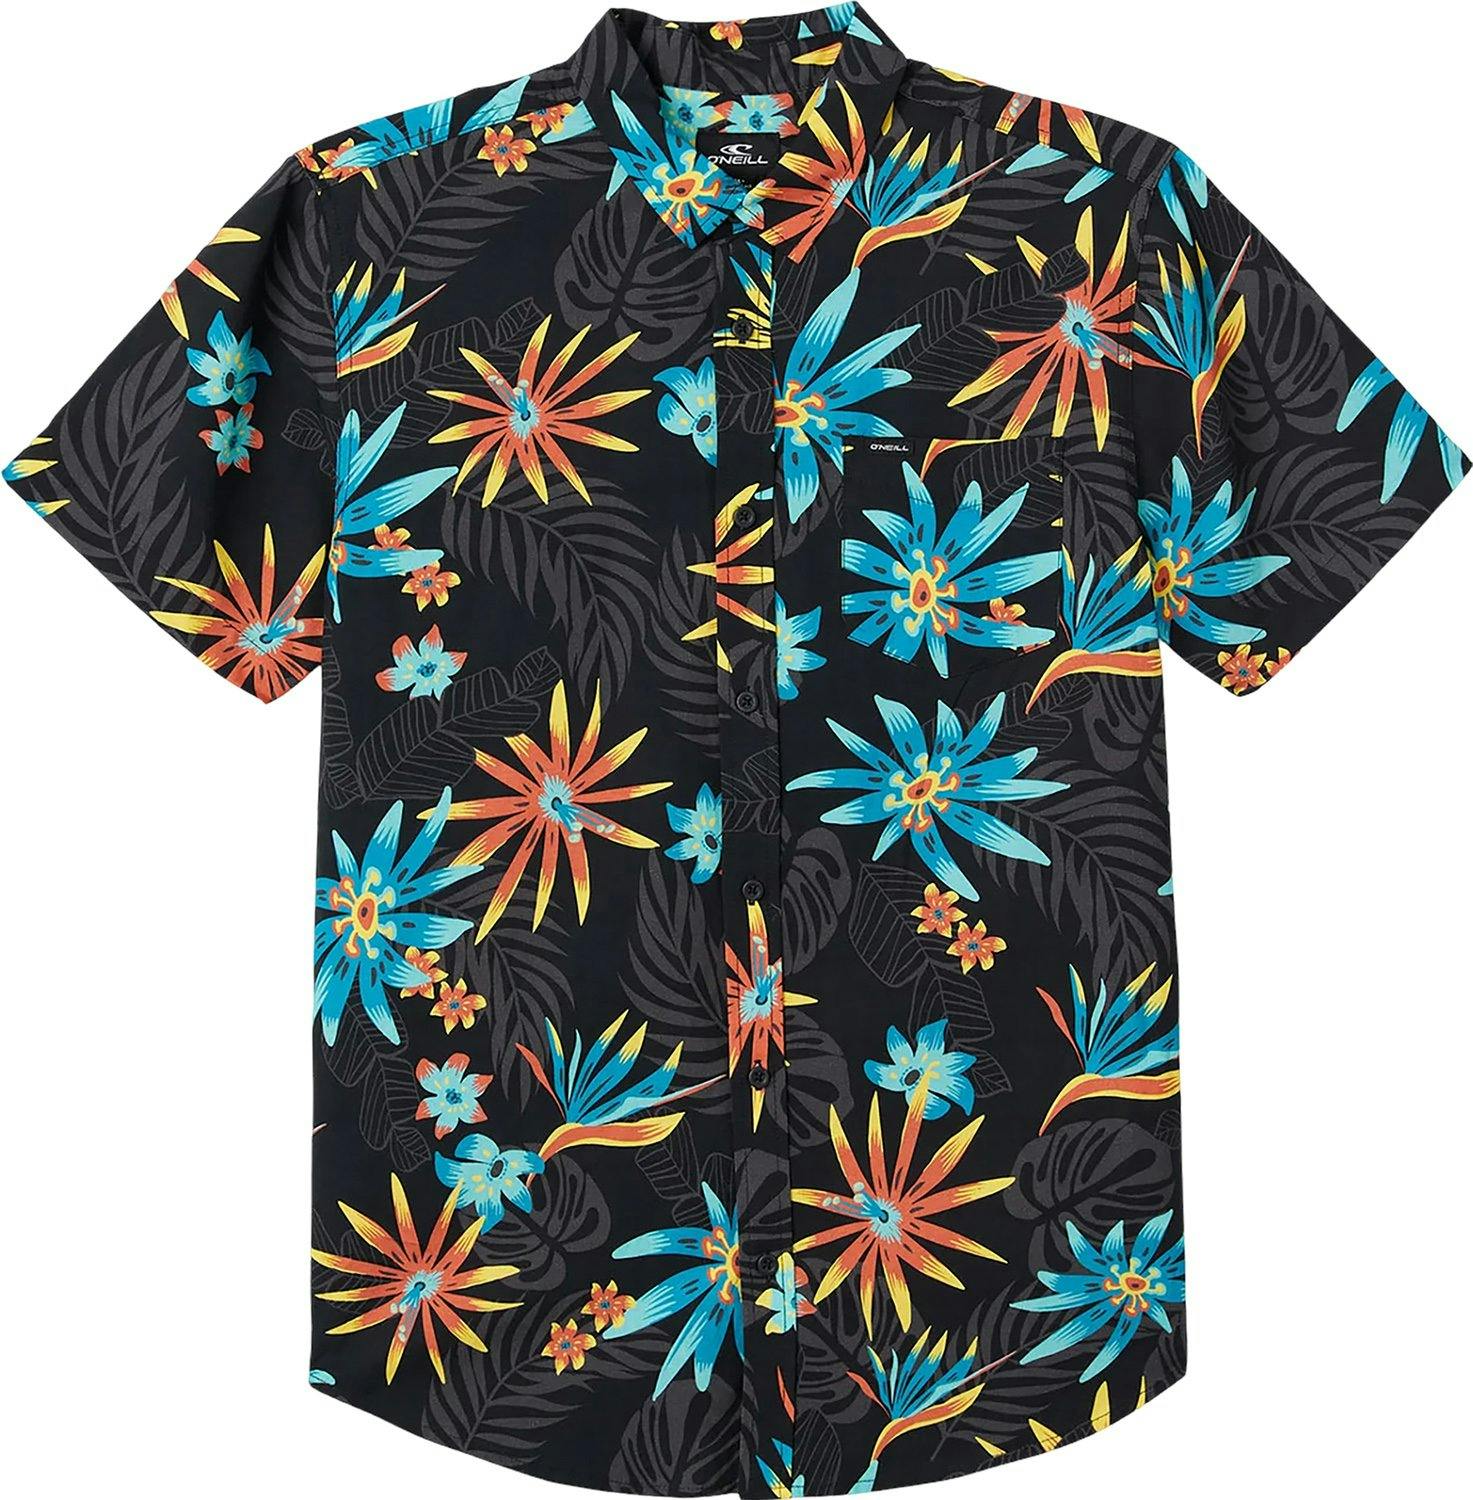 Product image for Oasis Eco Short Sleeve Modern Woven Shirt - Men's